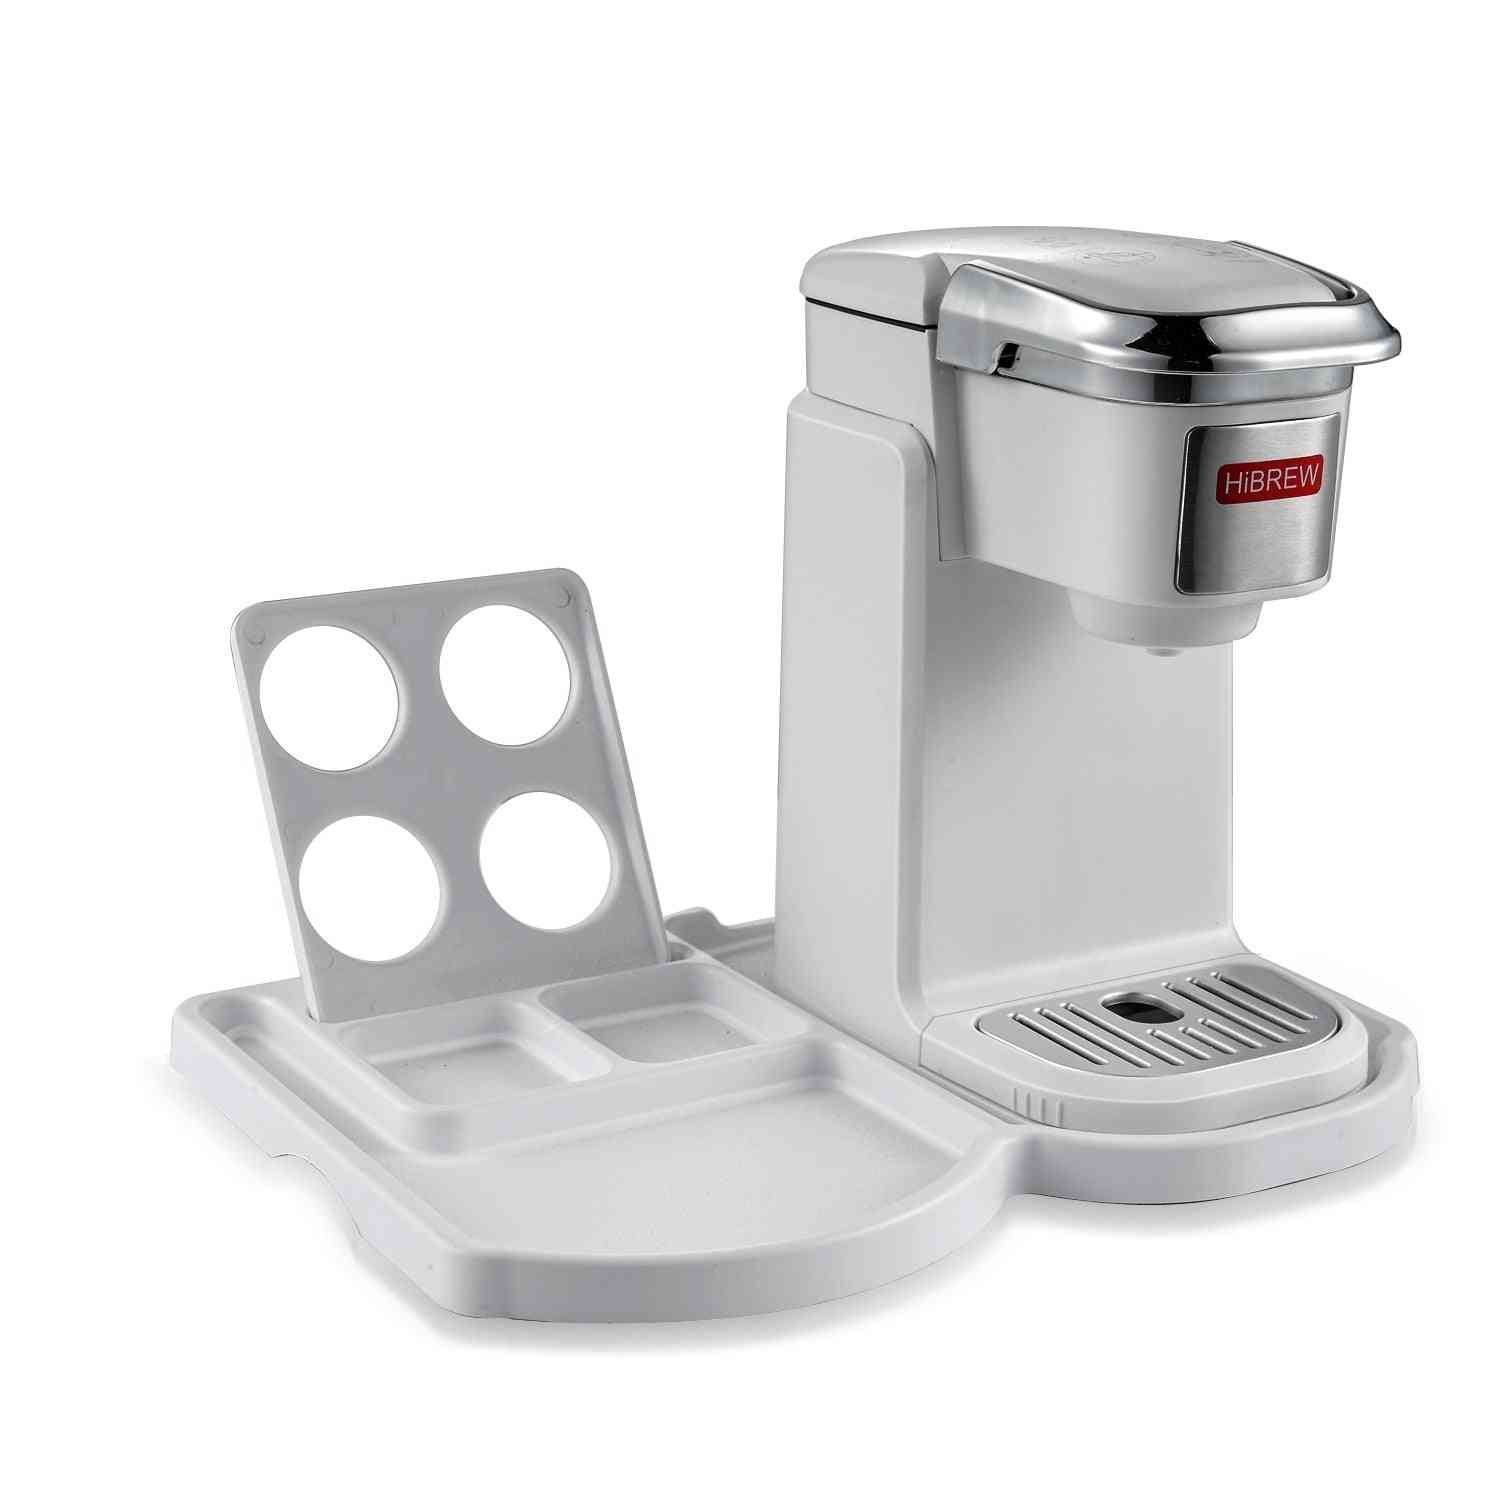 Plastic Tray Set For Coffee Machine, Compartment Capsule Holder